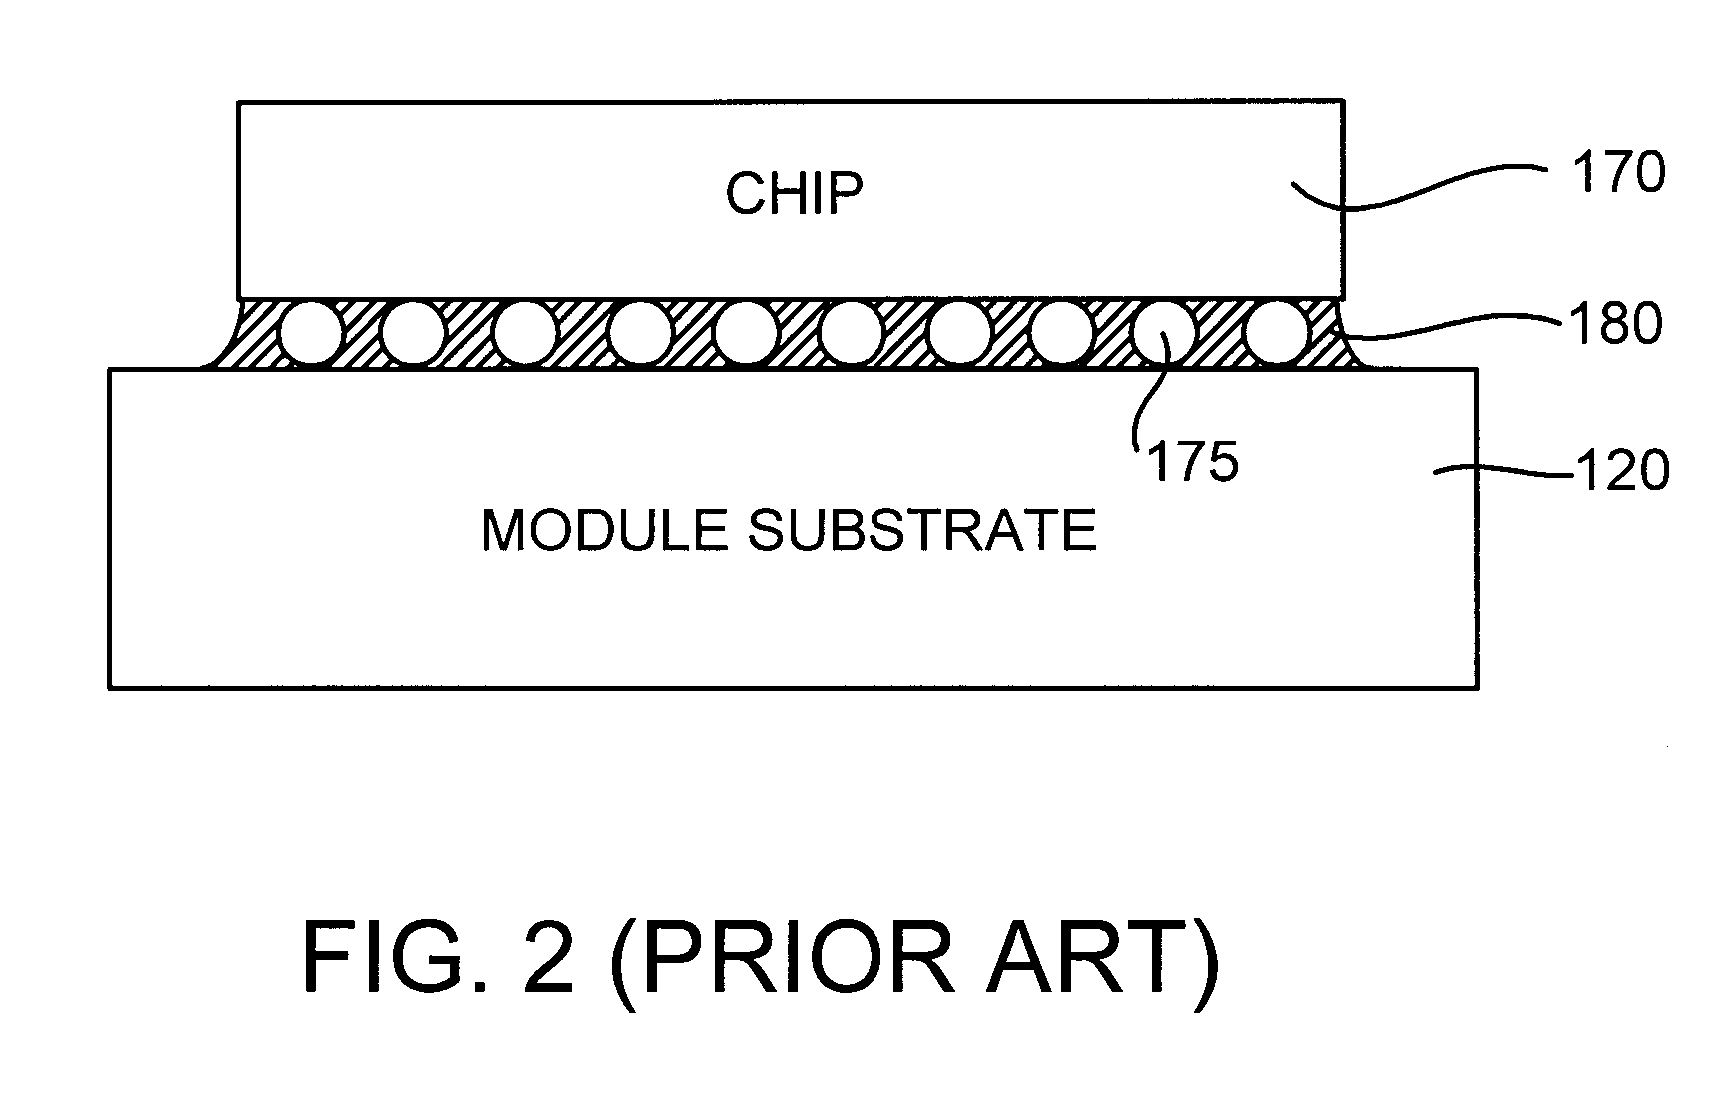 Chip Module Having Solder Balls Coated with a Thin Cast Polymer Barrier Layer for Corrosion Protection and Reworkability, and Method for Producing Same